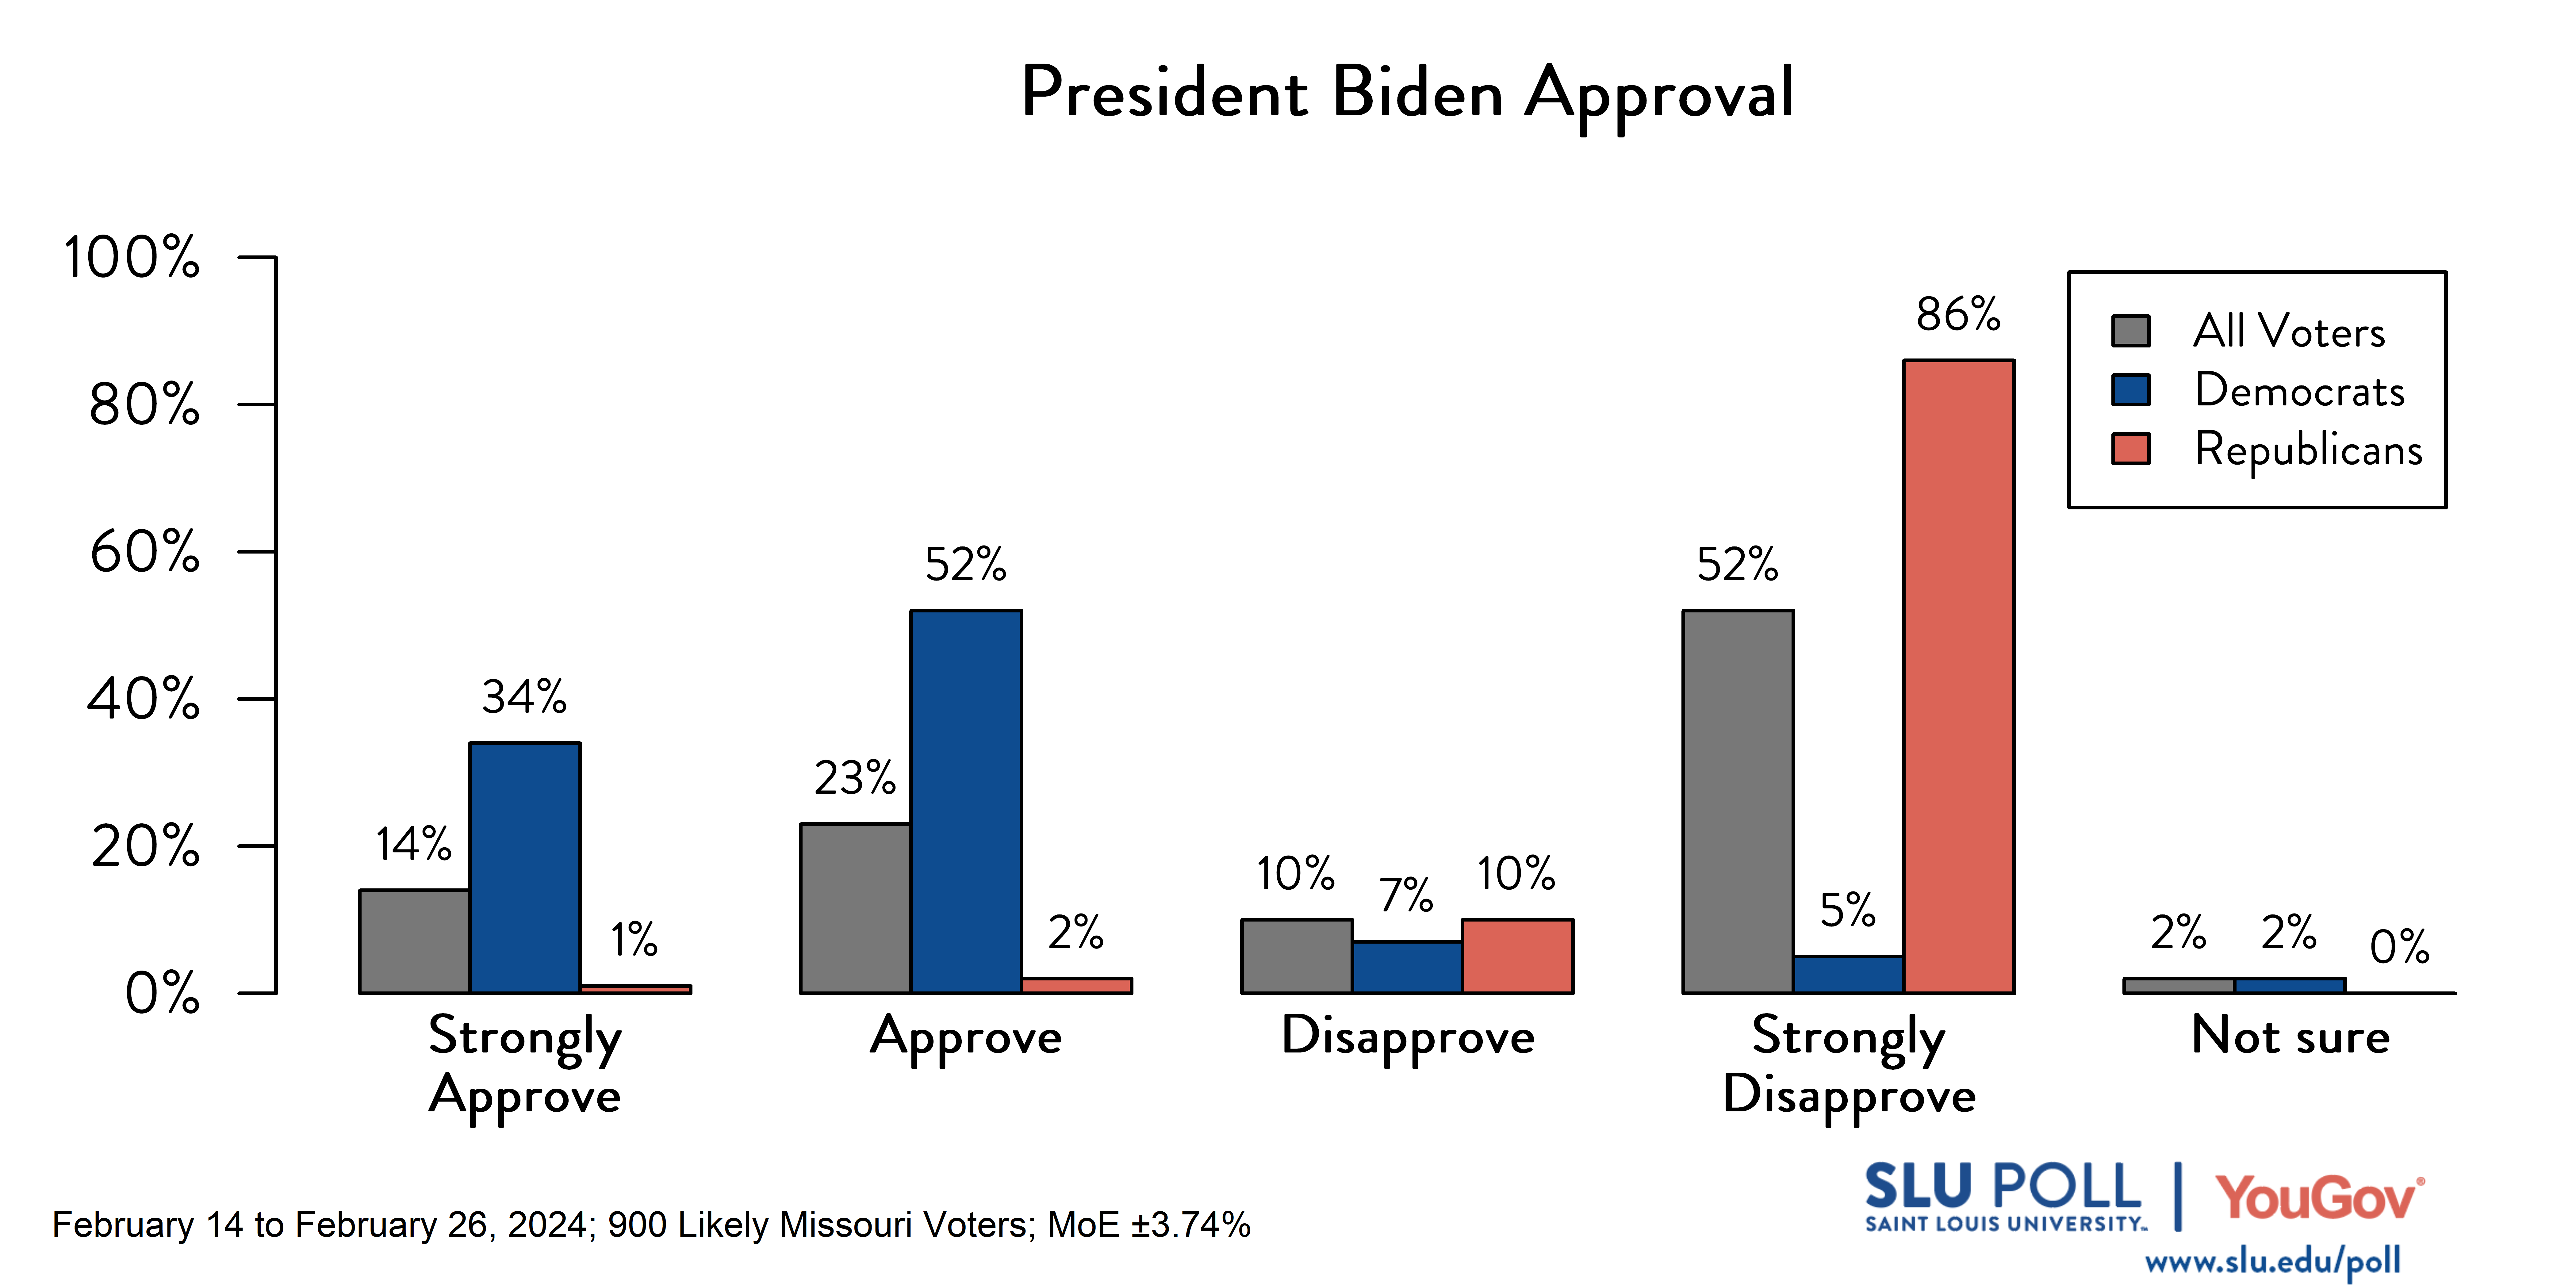 Bar graph of SLU/YouGov Poll results for Biden approval question. Results in caption